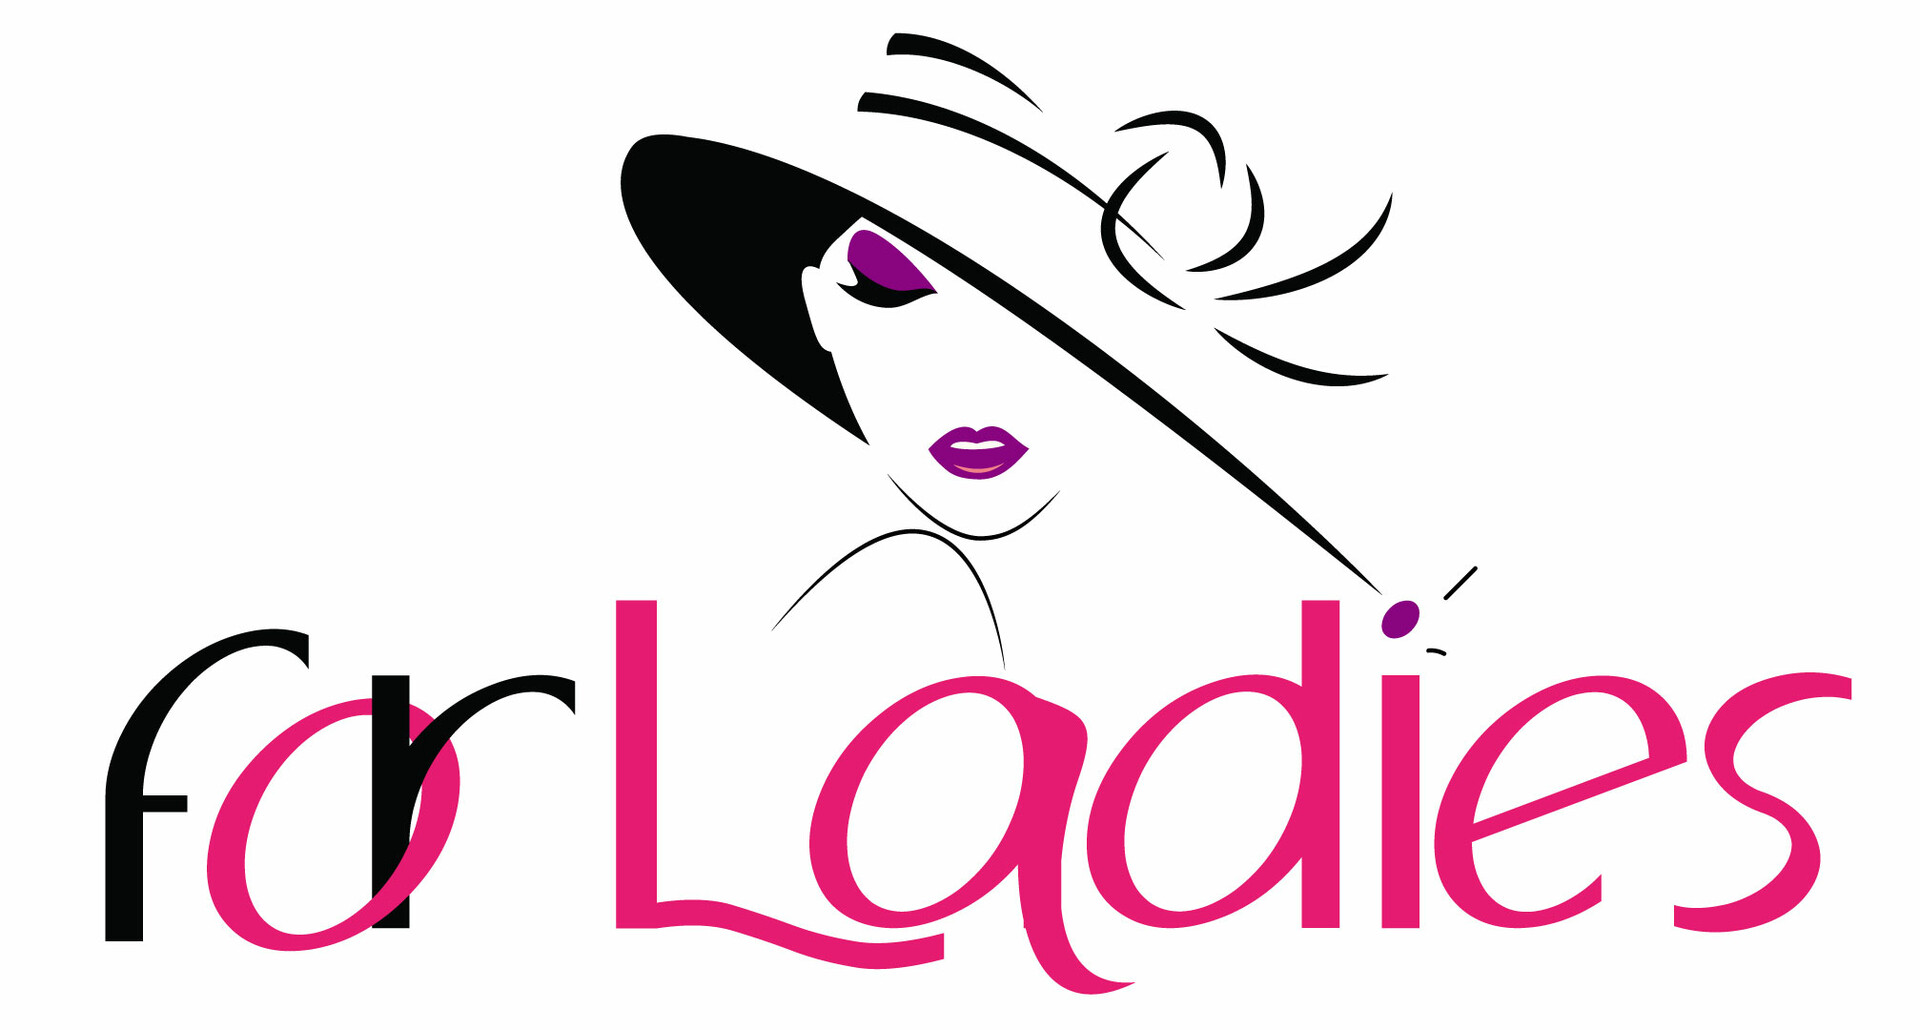 Mike Grant - Logo FOR LADIES